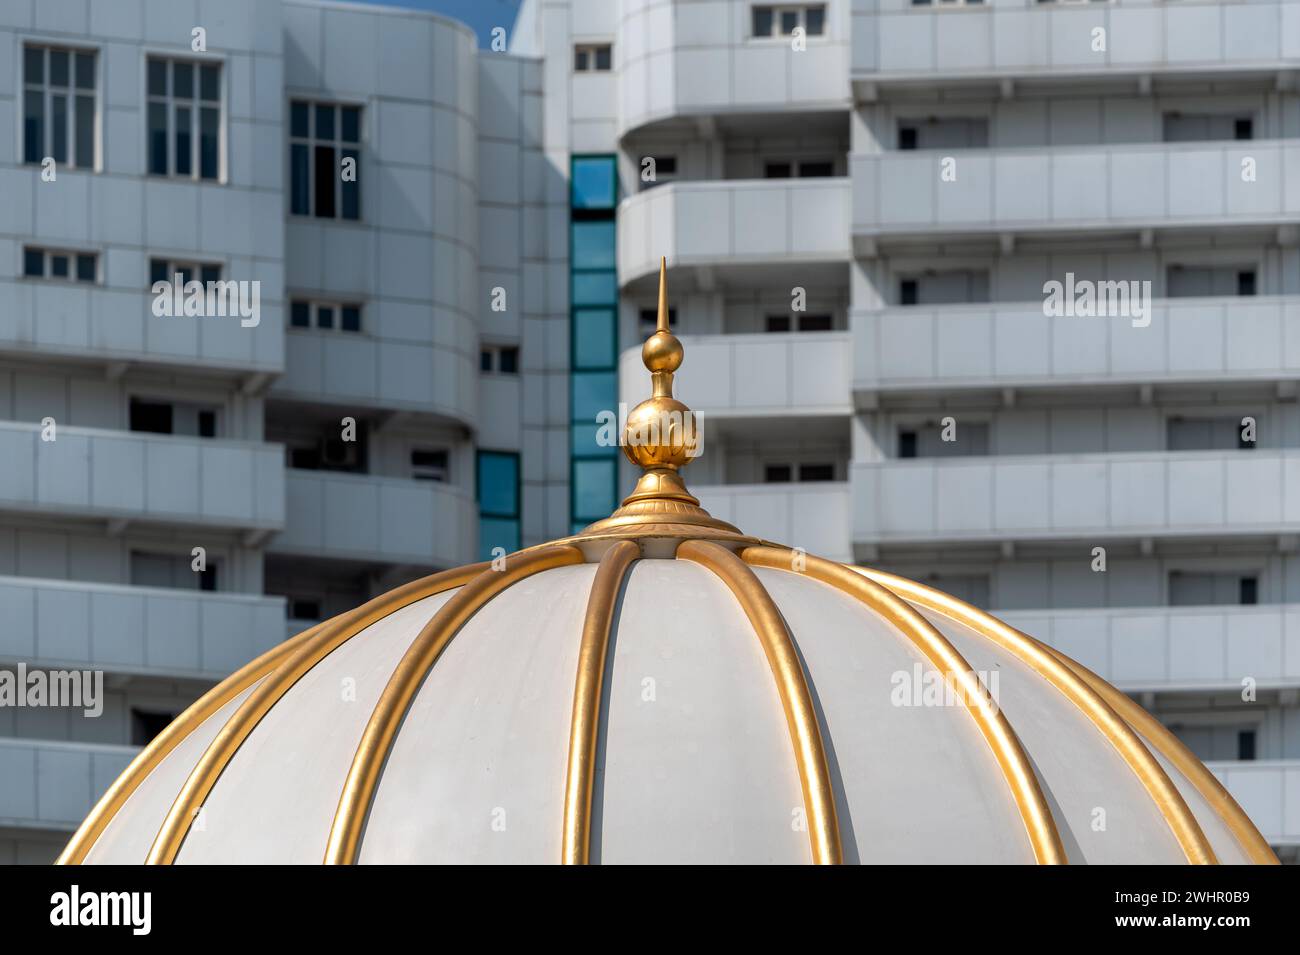 Dome of an Islamic mosque against the backdrop of modern houses Stock Photo